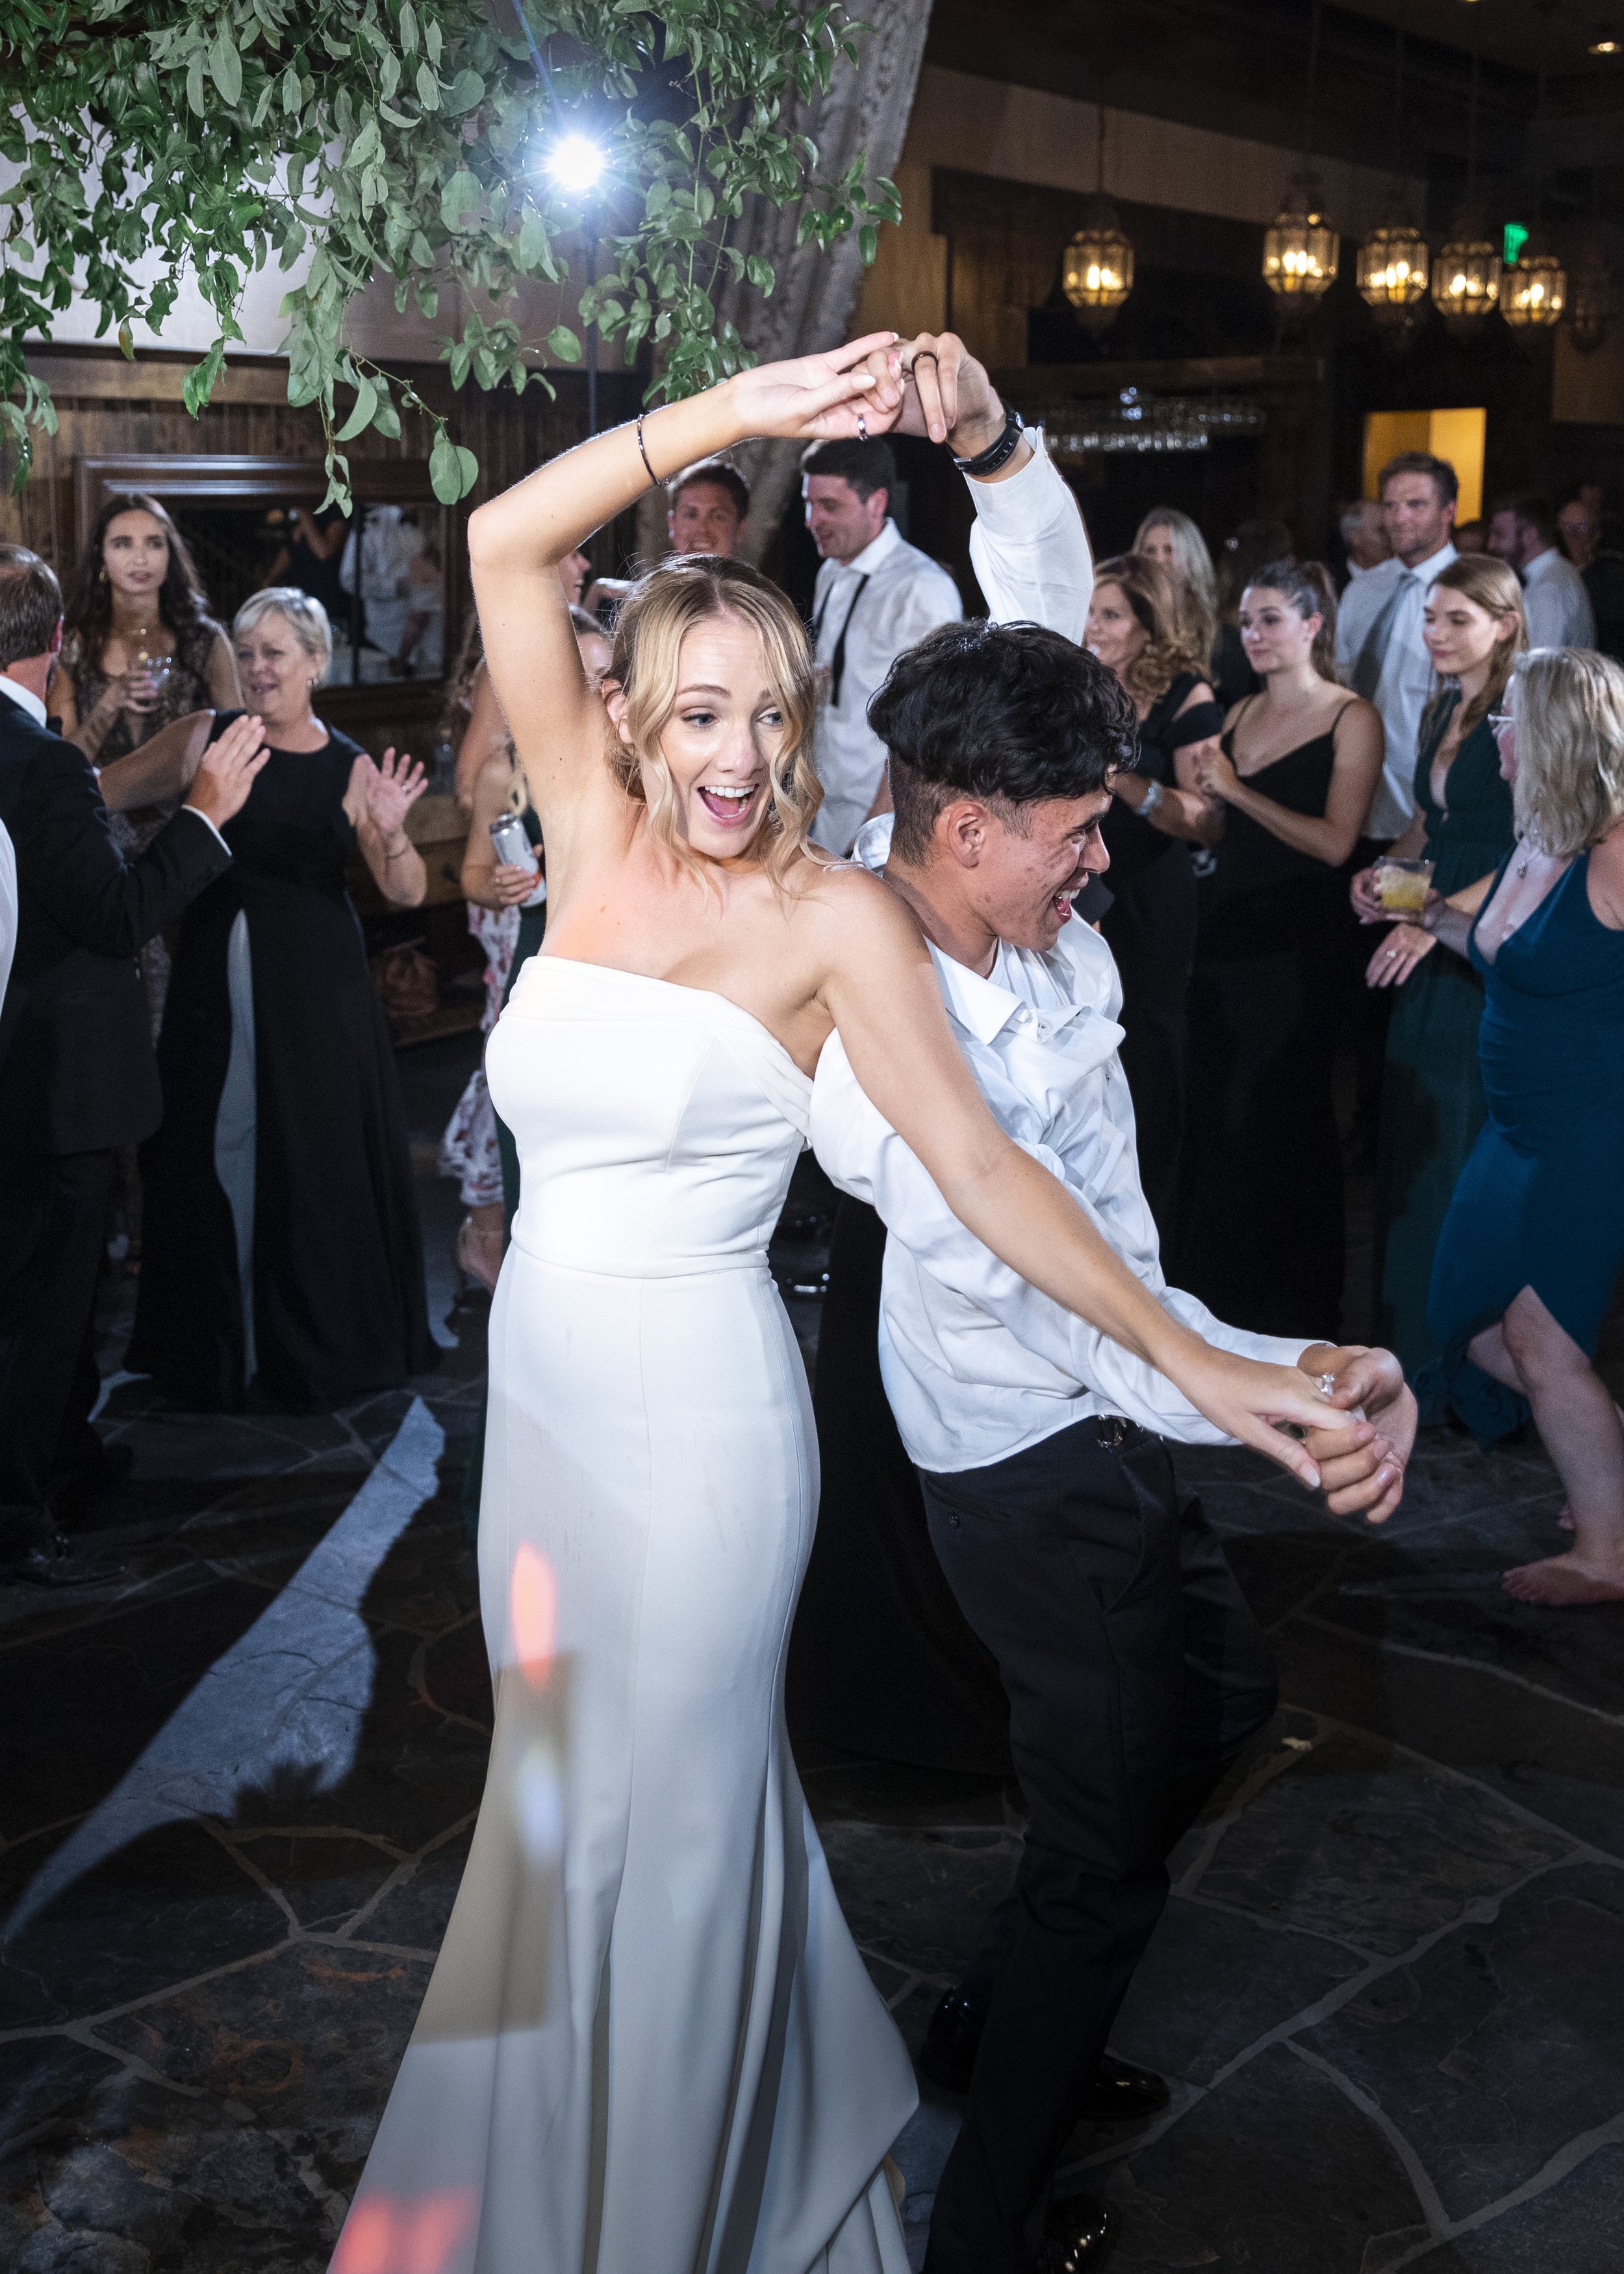  Savanna Richardson Photography captures the bride dancing with the groomsmen in the moonlight. dancing after the wedding outdoor wedding dancing #savannarichardsonphotography #tahoewedding #lakesidewedding #outdoorwedding #summerwedding #laketahoe 